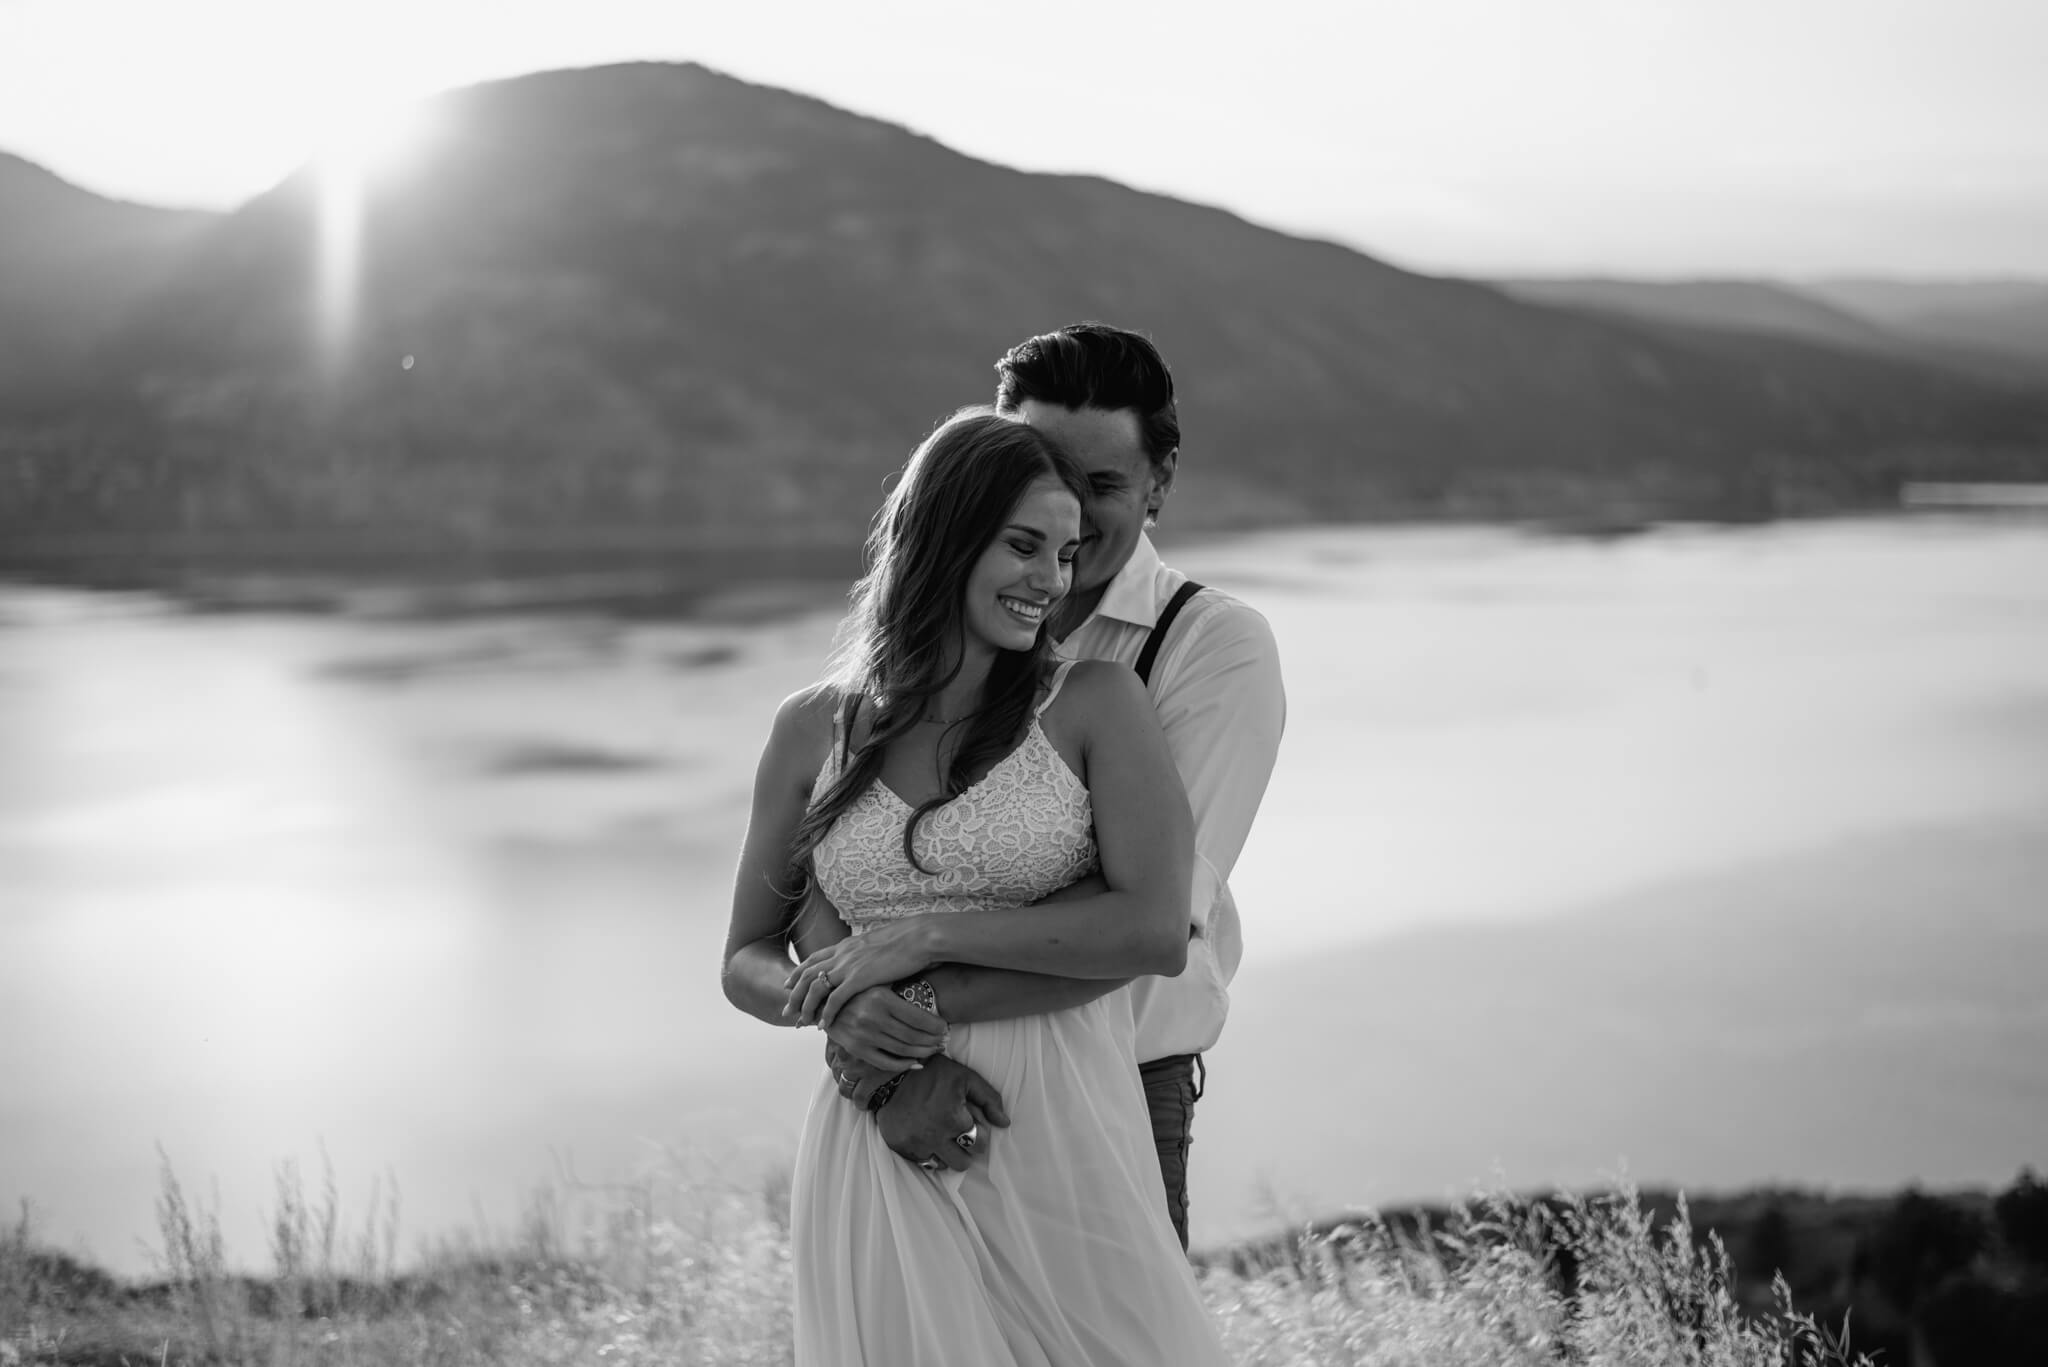 husband hugs wife from behind in b&w photo